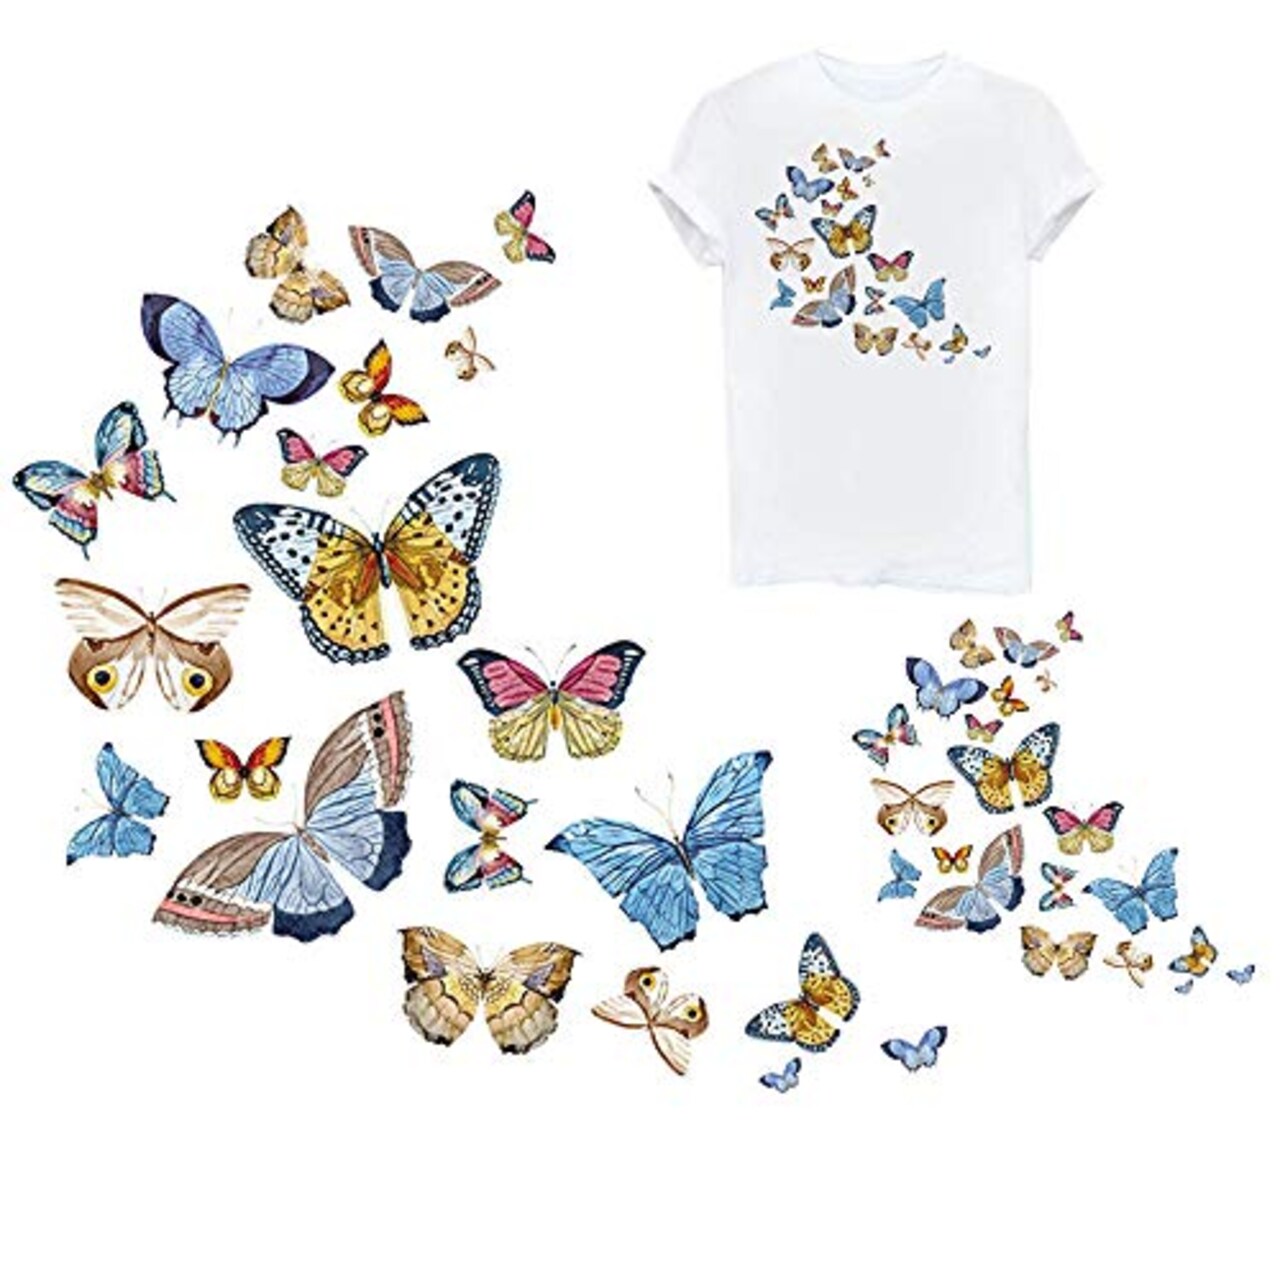 Ceresa Inc Butterfly Iron On Patches Heat Transfer Stickers Cute Appliques  Repair and Decorate for Clothes Jackets Hats Backpacks Jeans,Kids Boys  Girls with Waterproof A-Level Washable1Pcs 21 Patterns